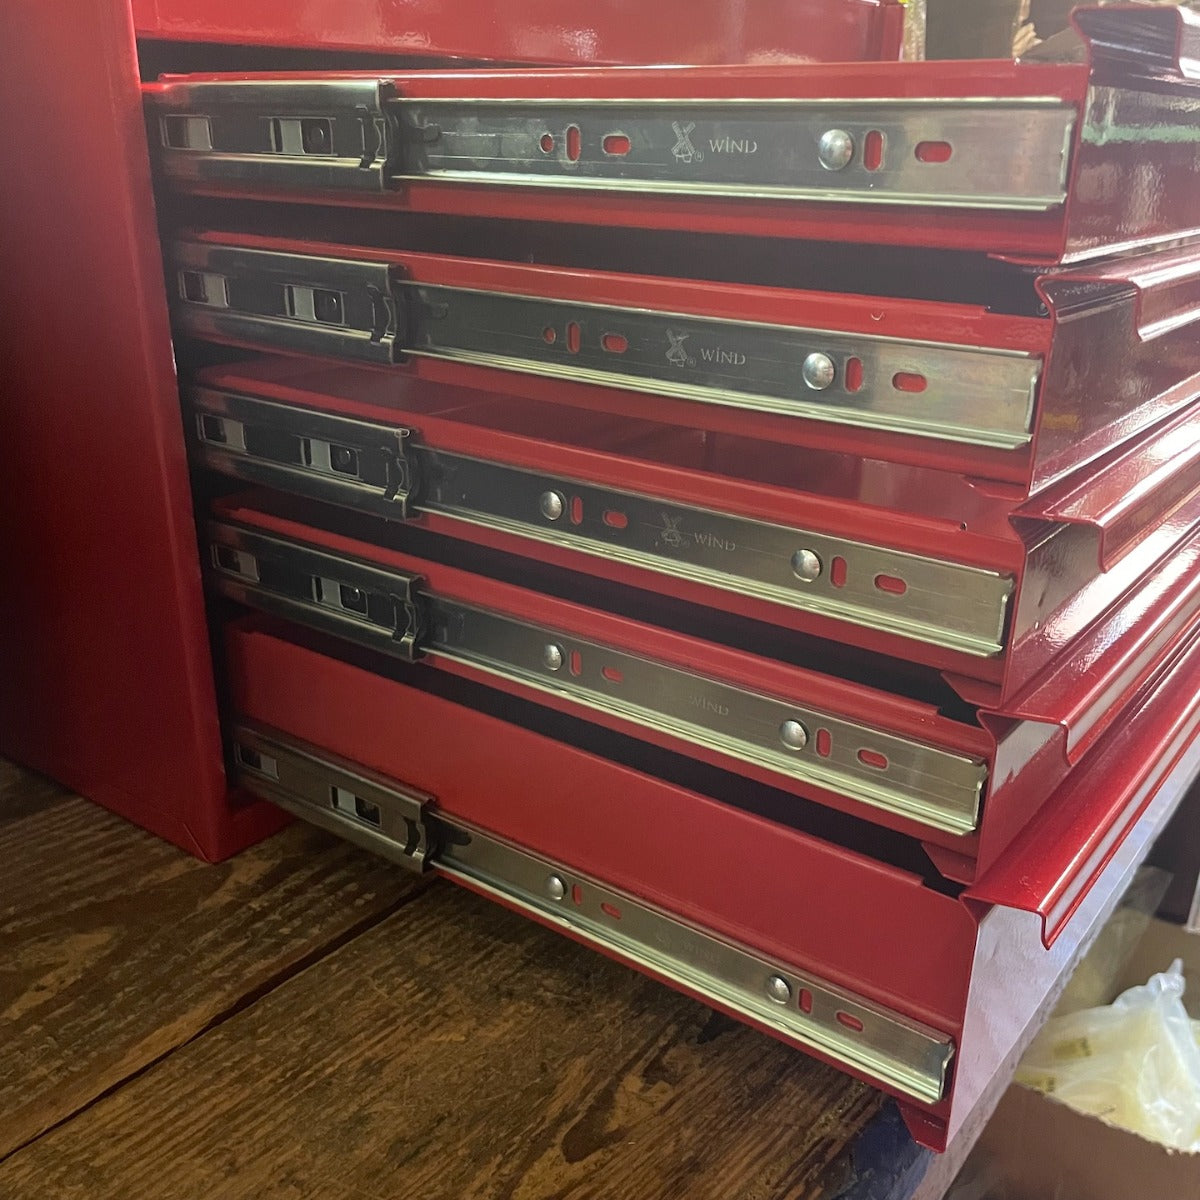 Valley 9 Drawer Red Metal Tool Box 26" x 15" x 17 1/2" (VALLEY-9)